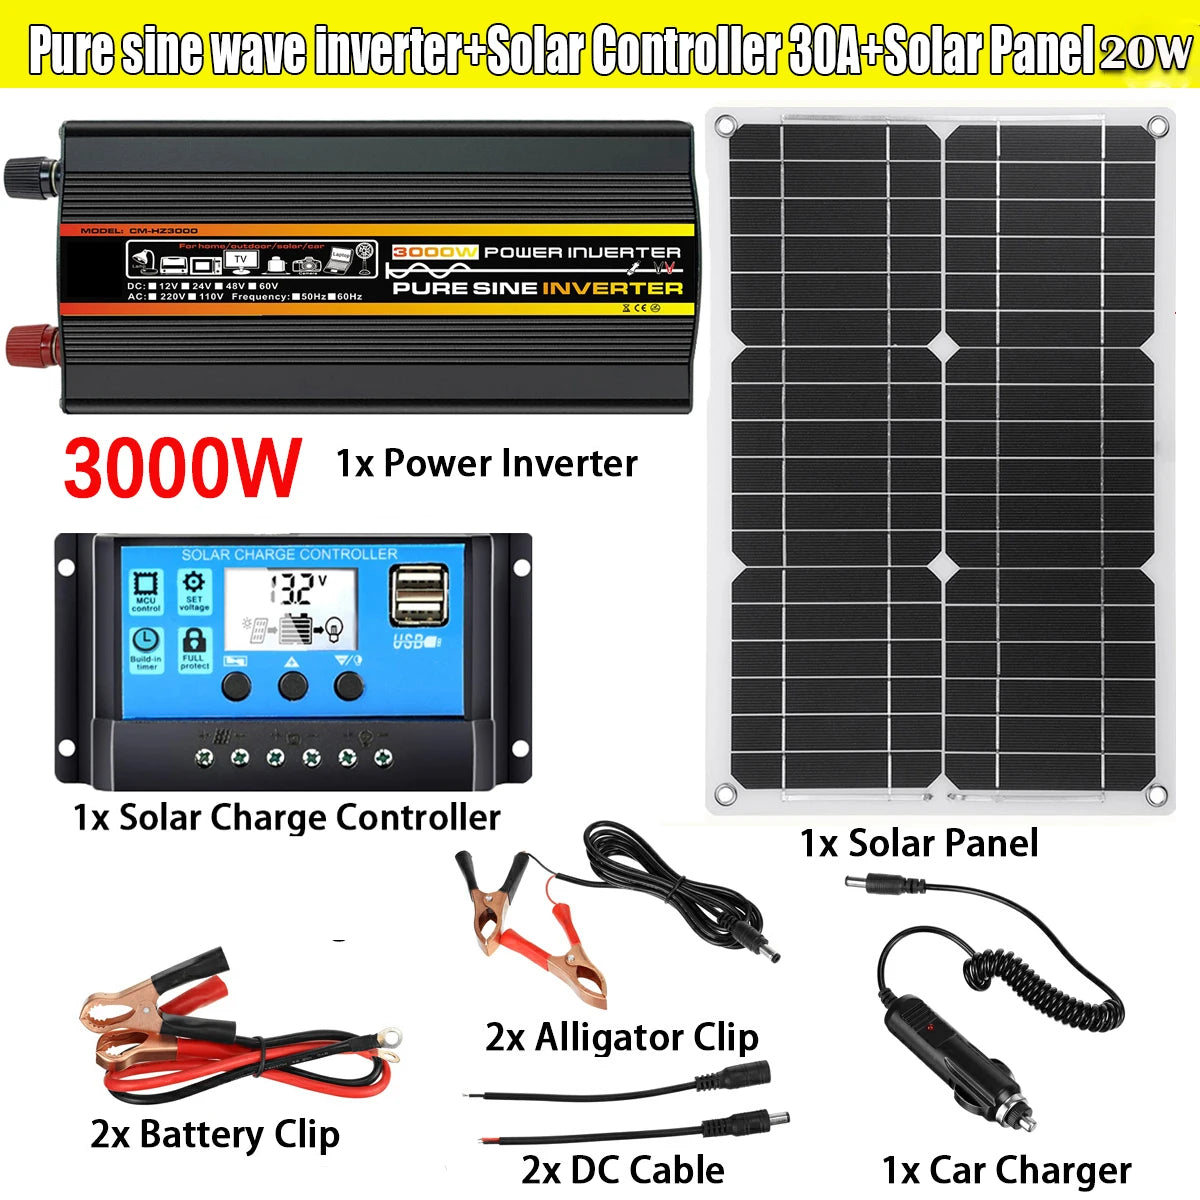 3000W/4000W/6000W Pure Sine Wave Inverter, Power bank kit for cars, yachts, RVs, and boats with pure sine wave inverter and solar charging features.